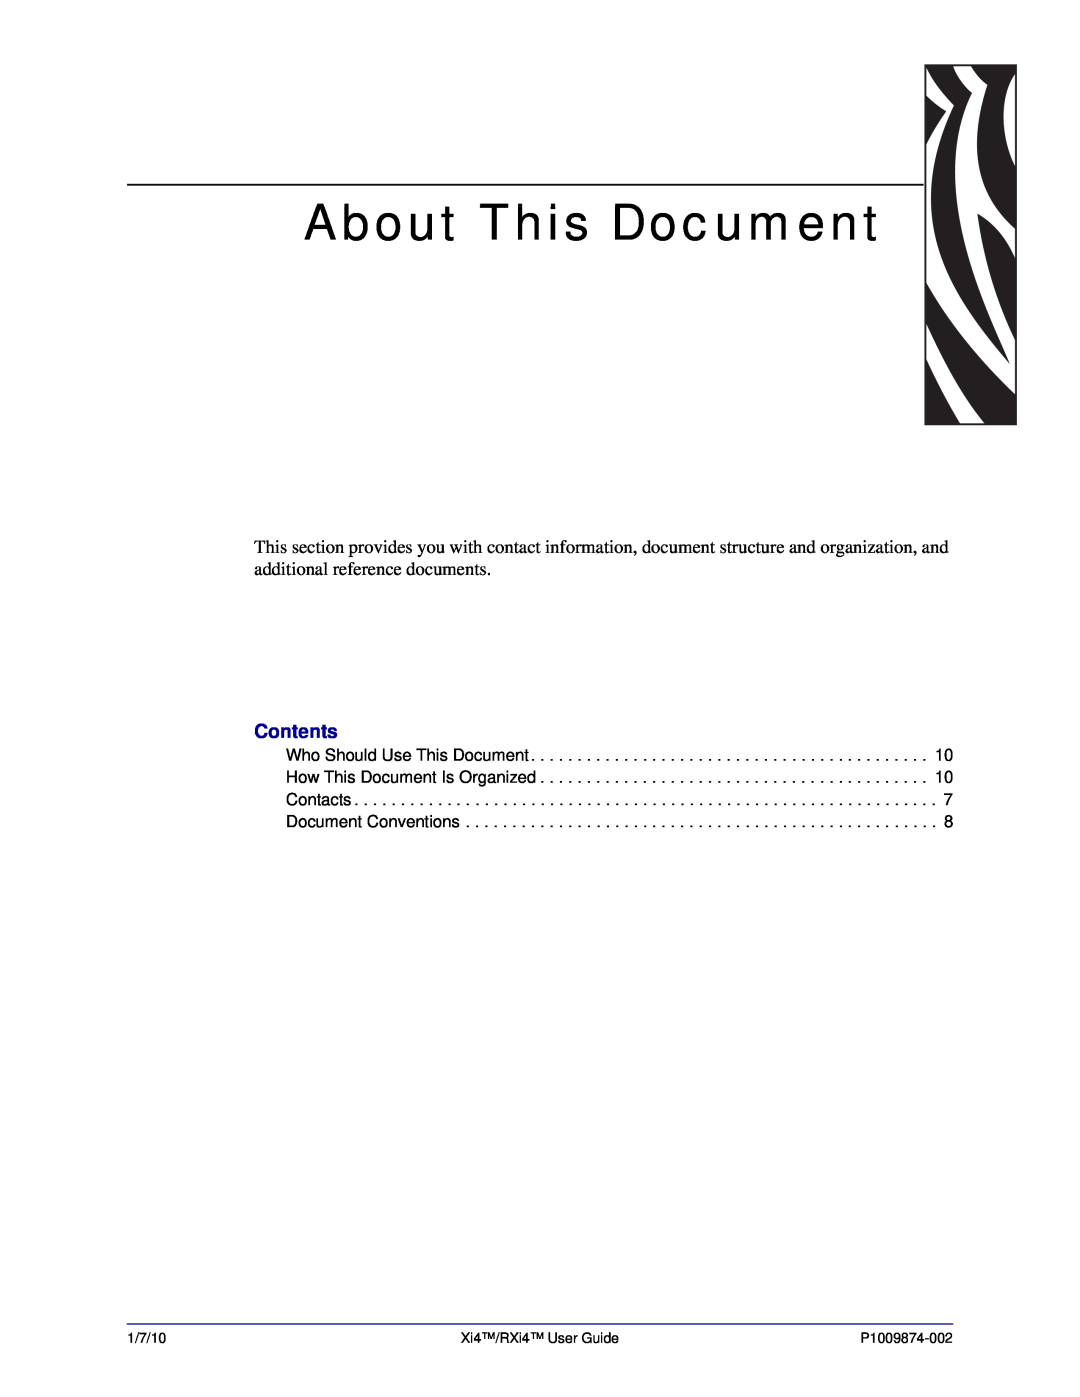 Zebra Technologies 14080100000, XI4TM, 14080100200 About This Document, Contents, 1/7/10, Xi4/RXi4 User Guide, P1009874-002 